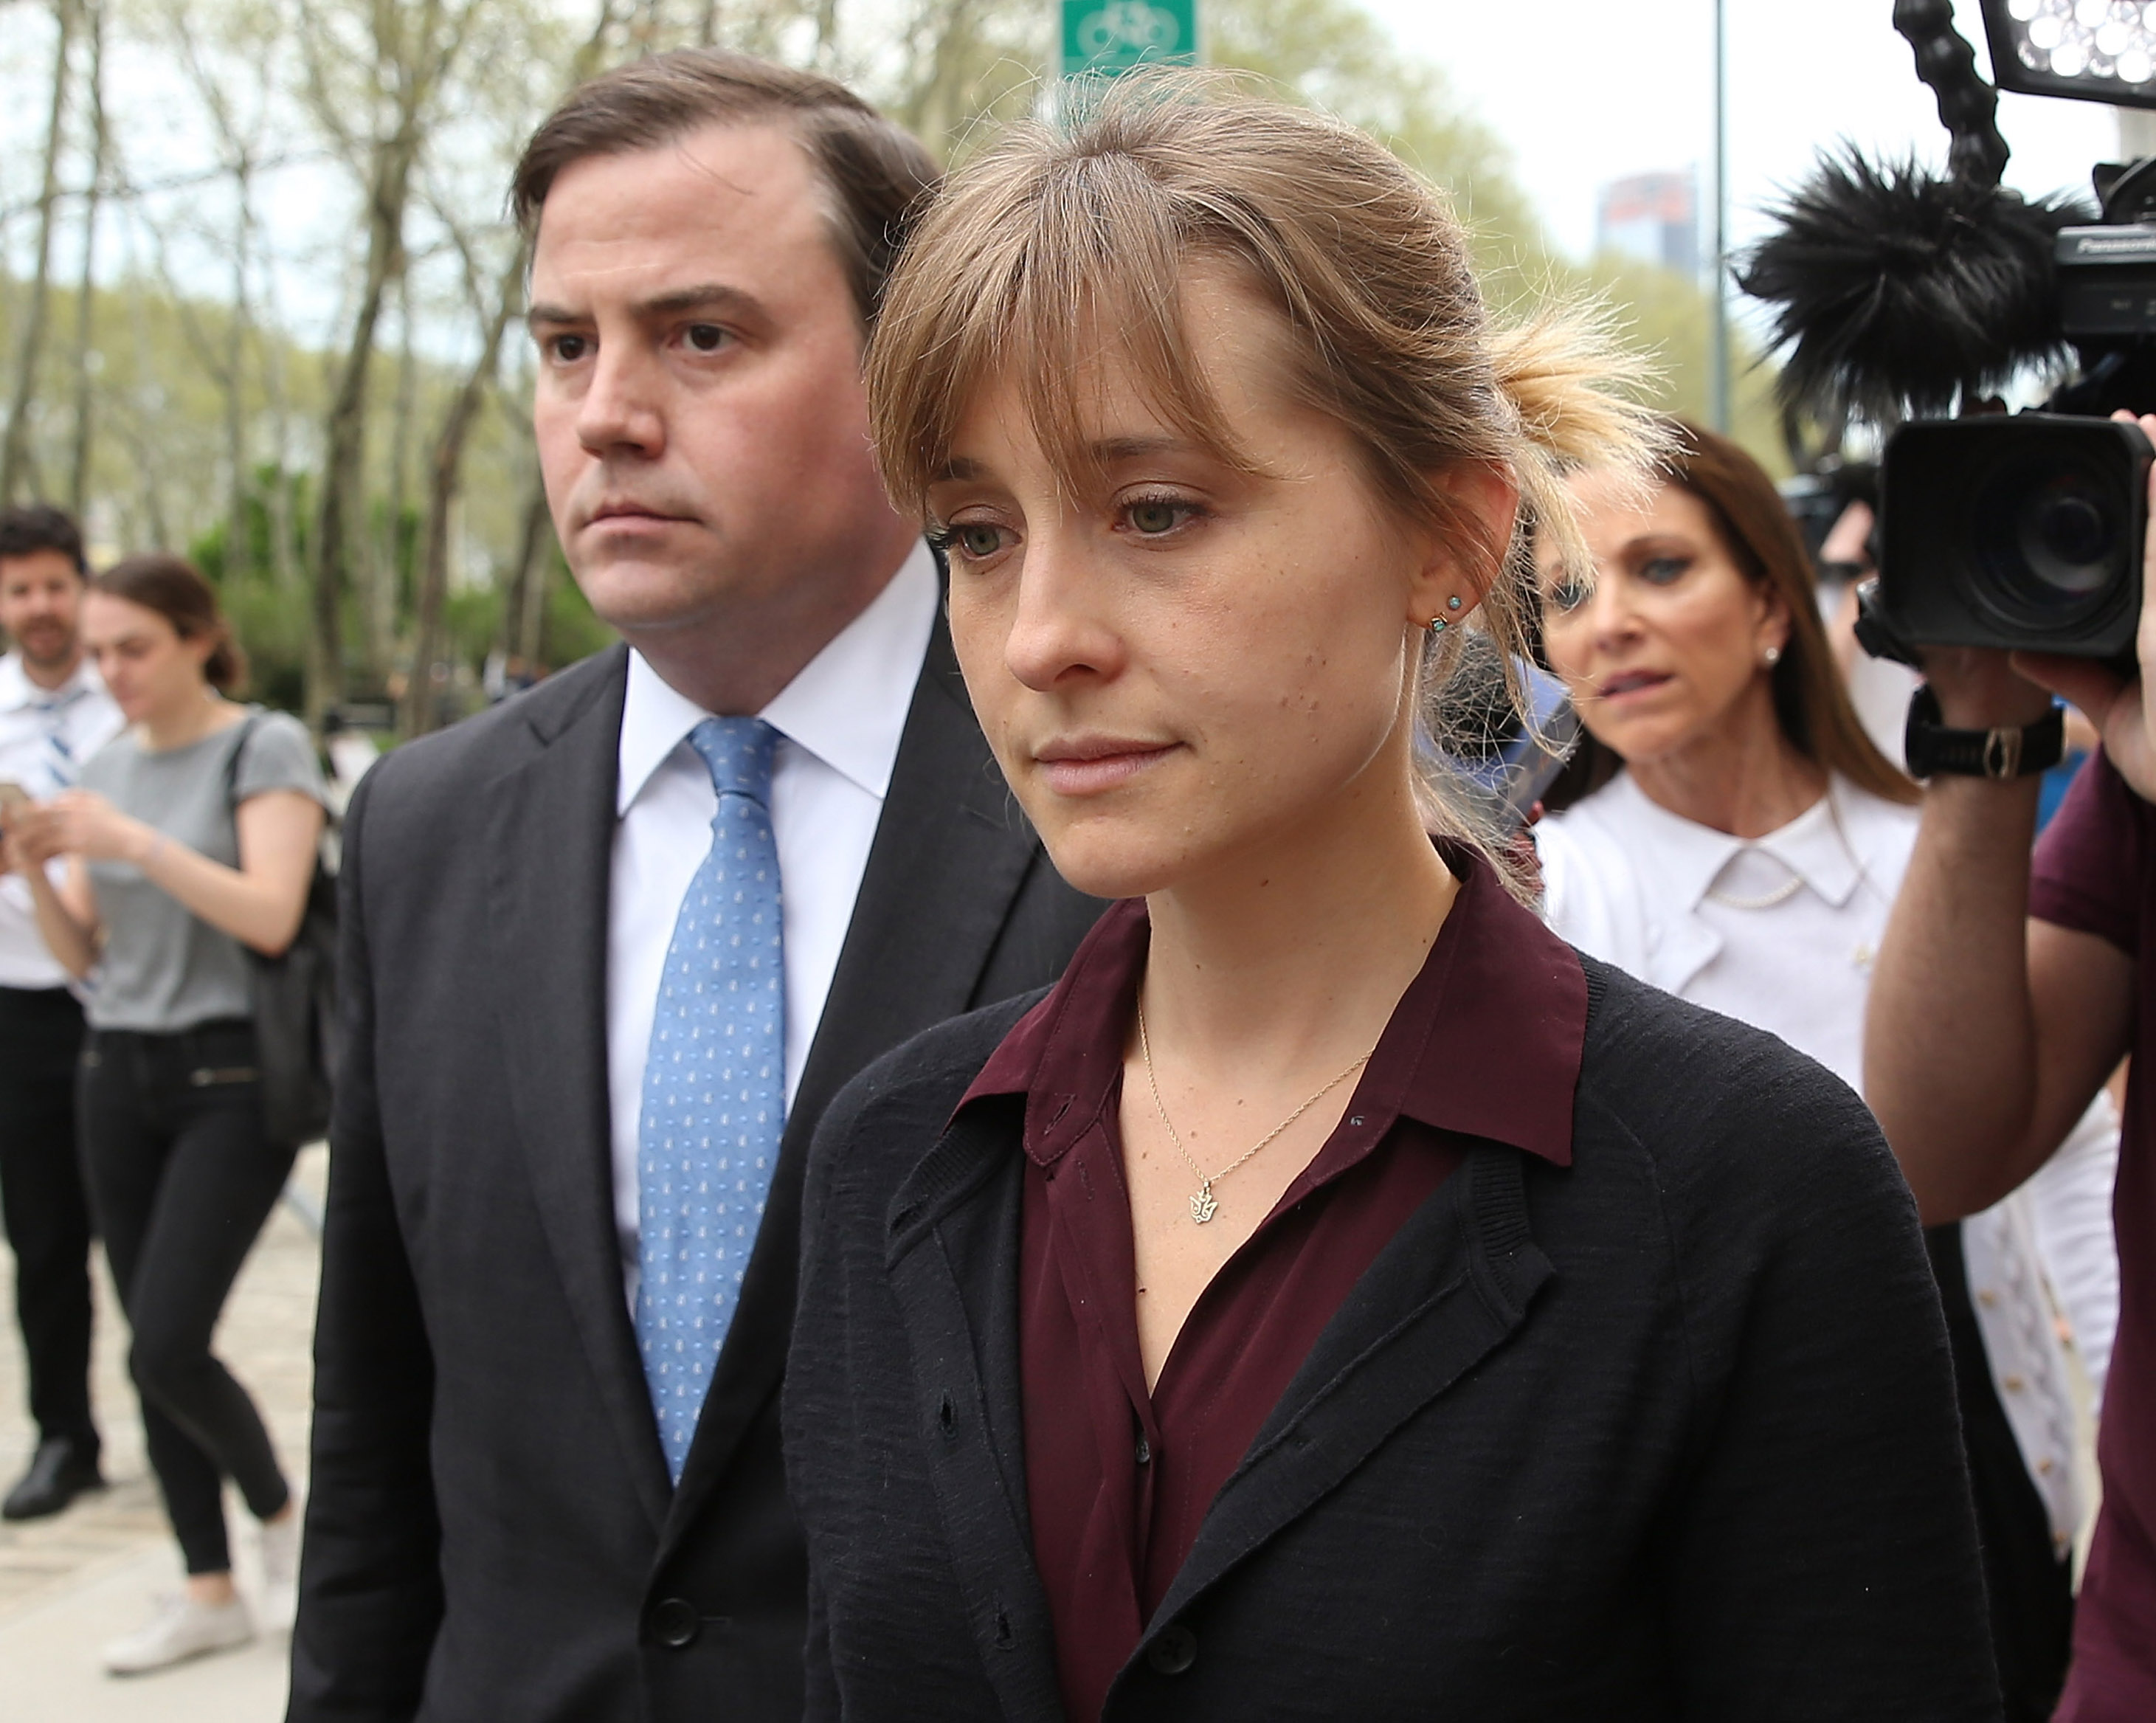 Allison Mack, right, departs the United States Eastern District Court in 2019. (Jemal Countess—Getty Images)